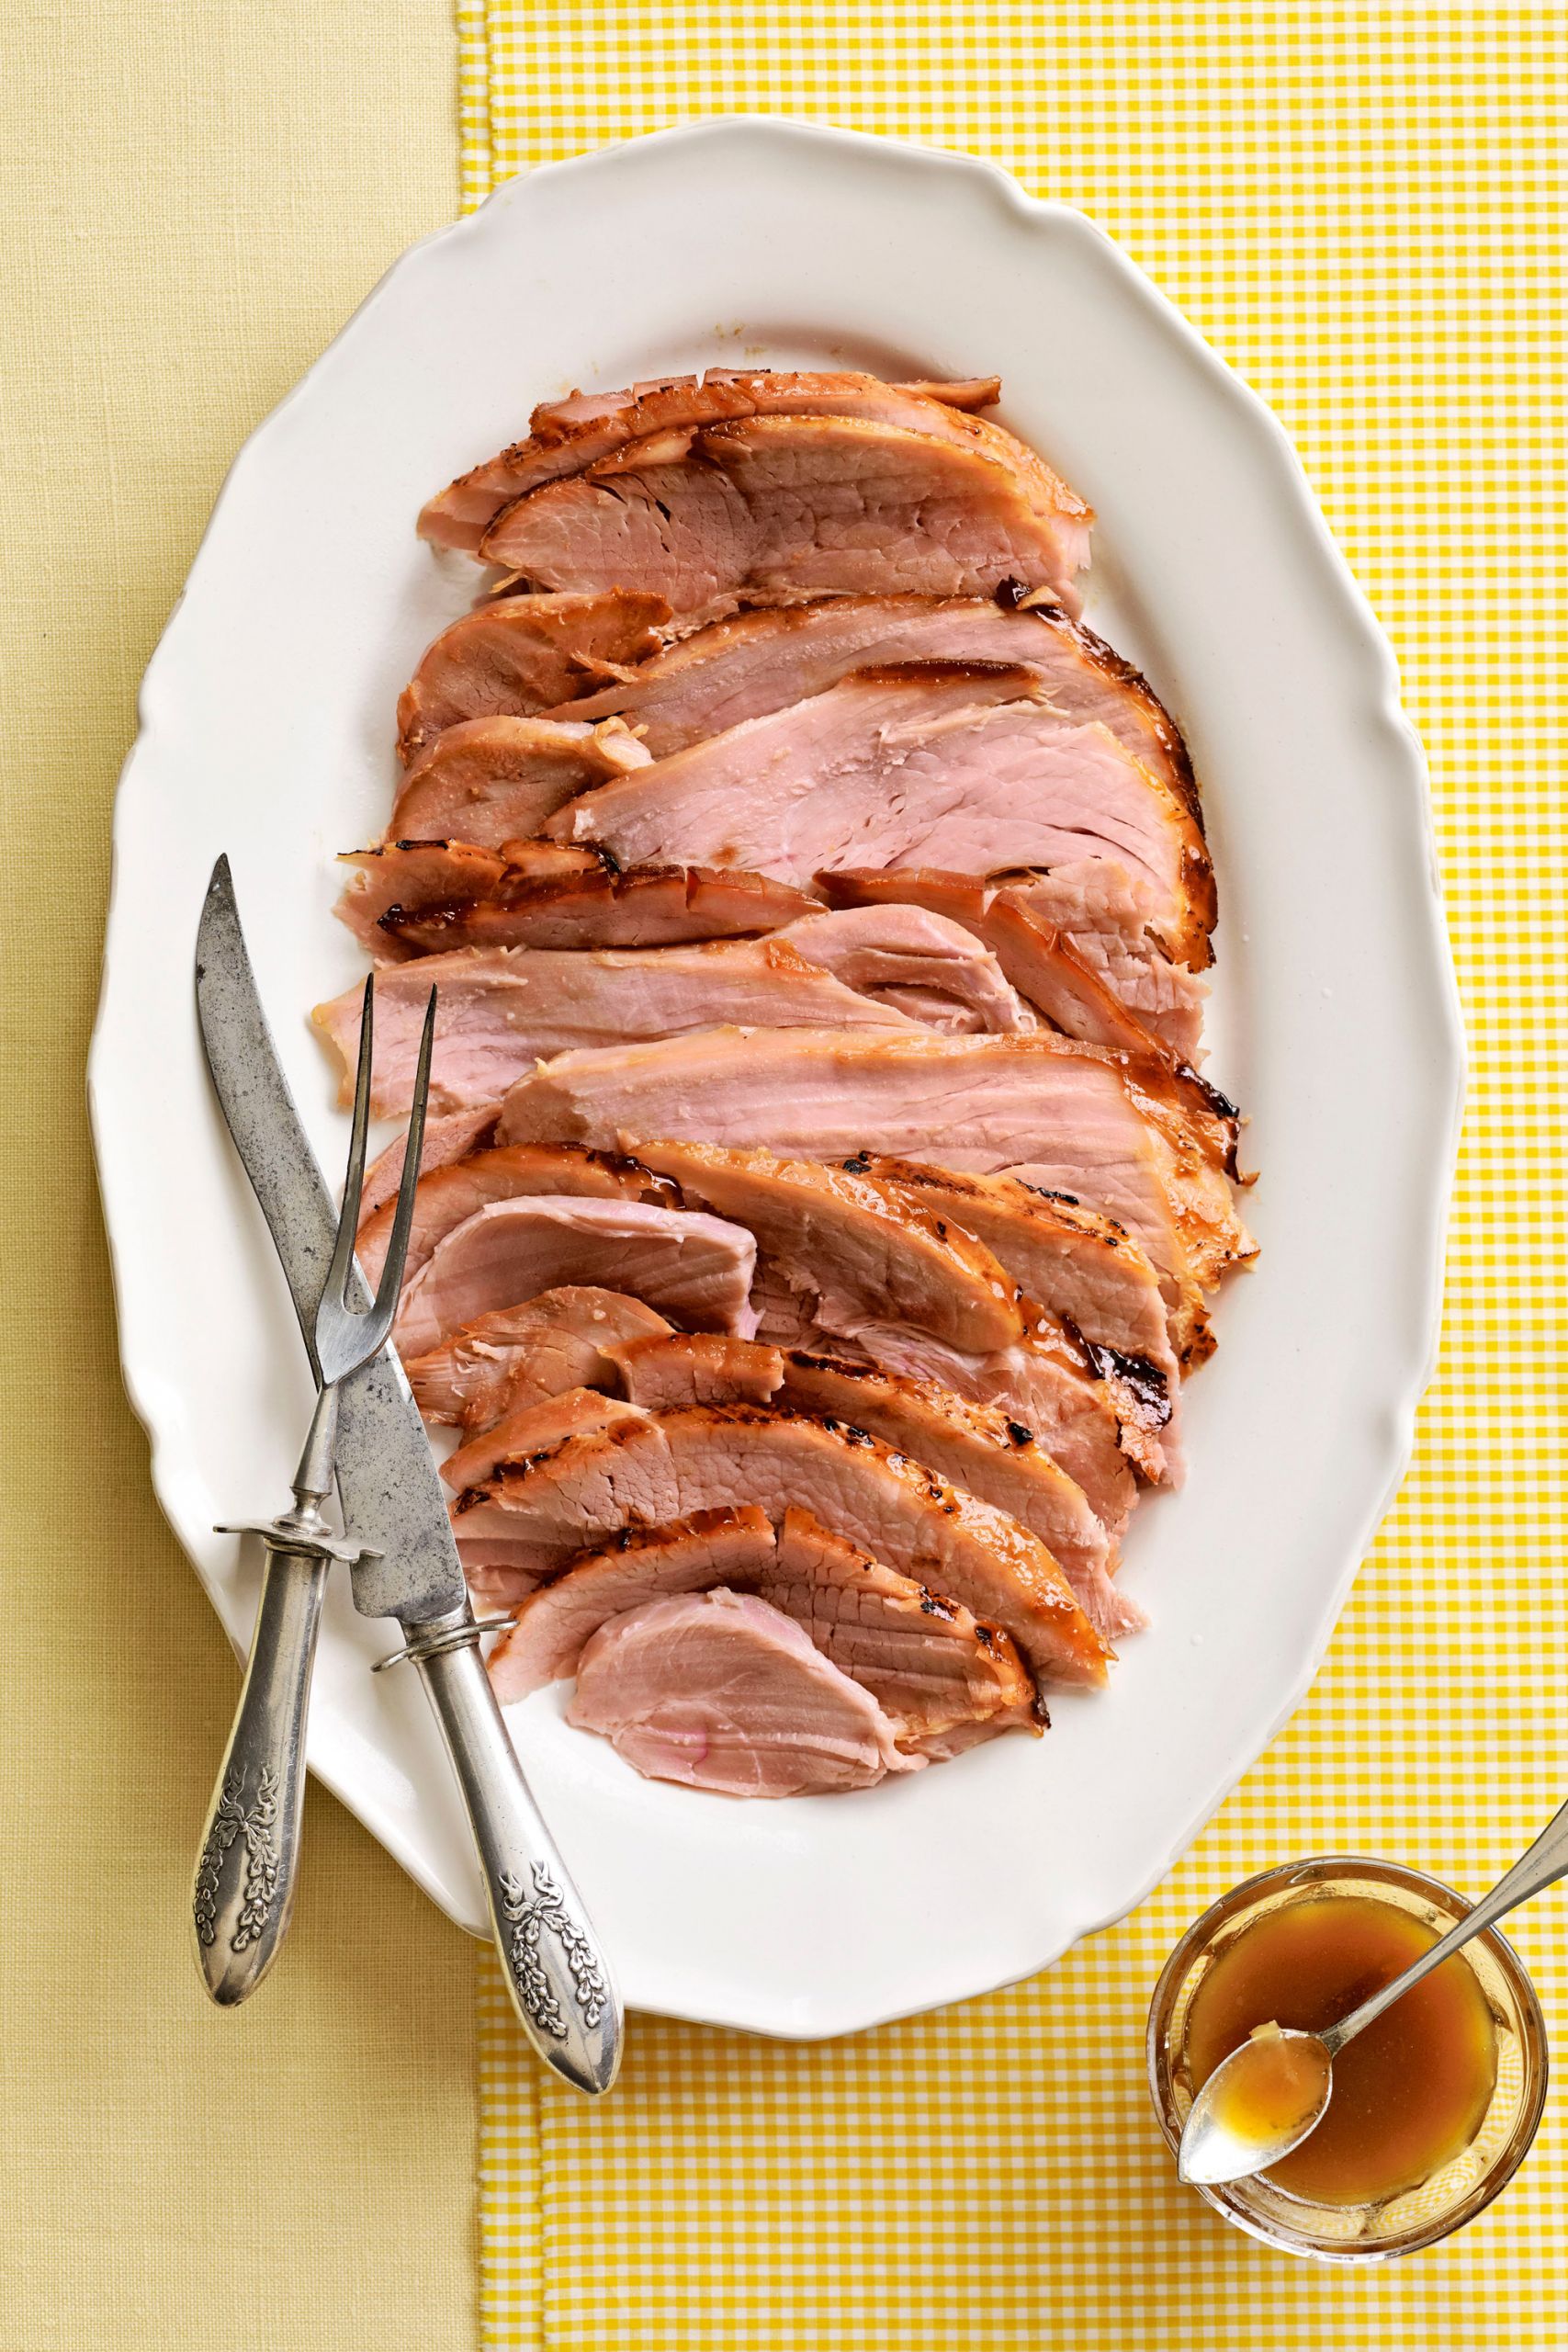 Best Easter Ham Awesome 11 Best Easter Ham Recipes How to Make An Easter Ham